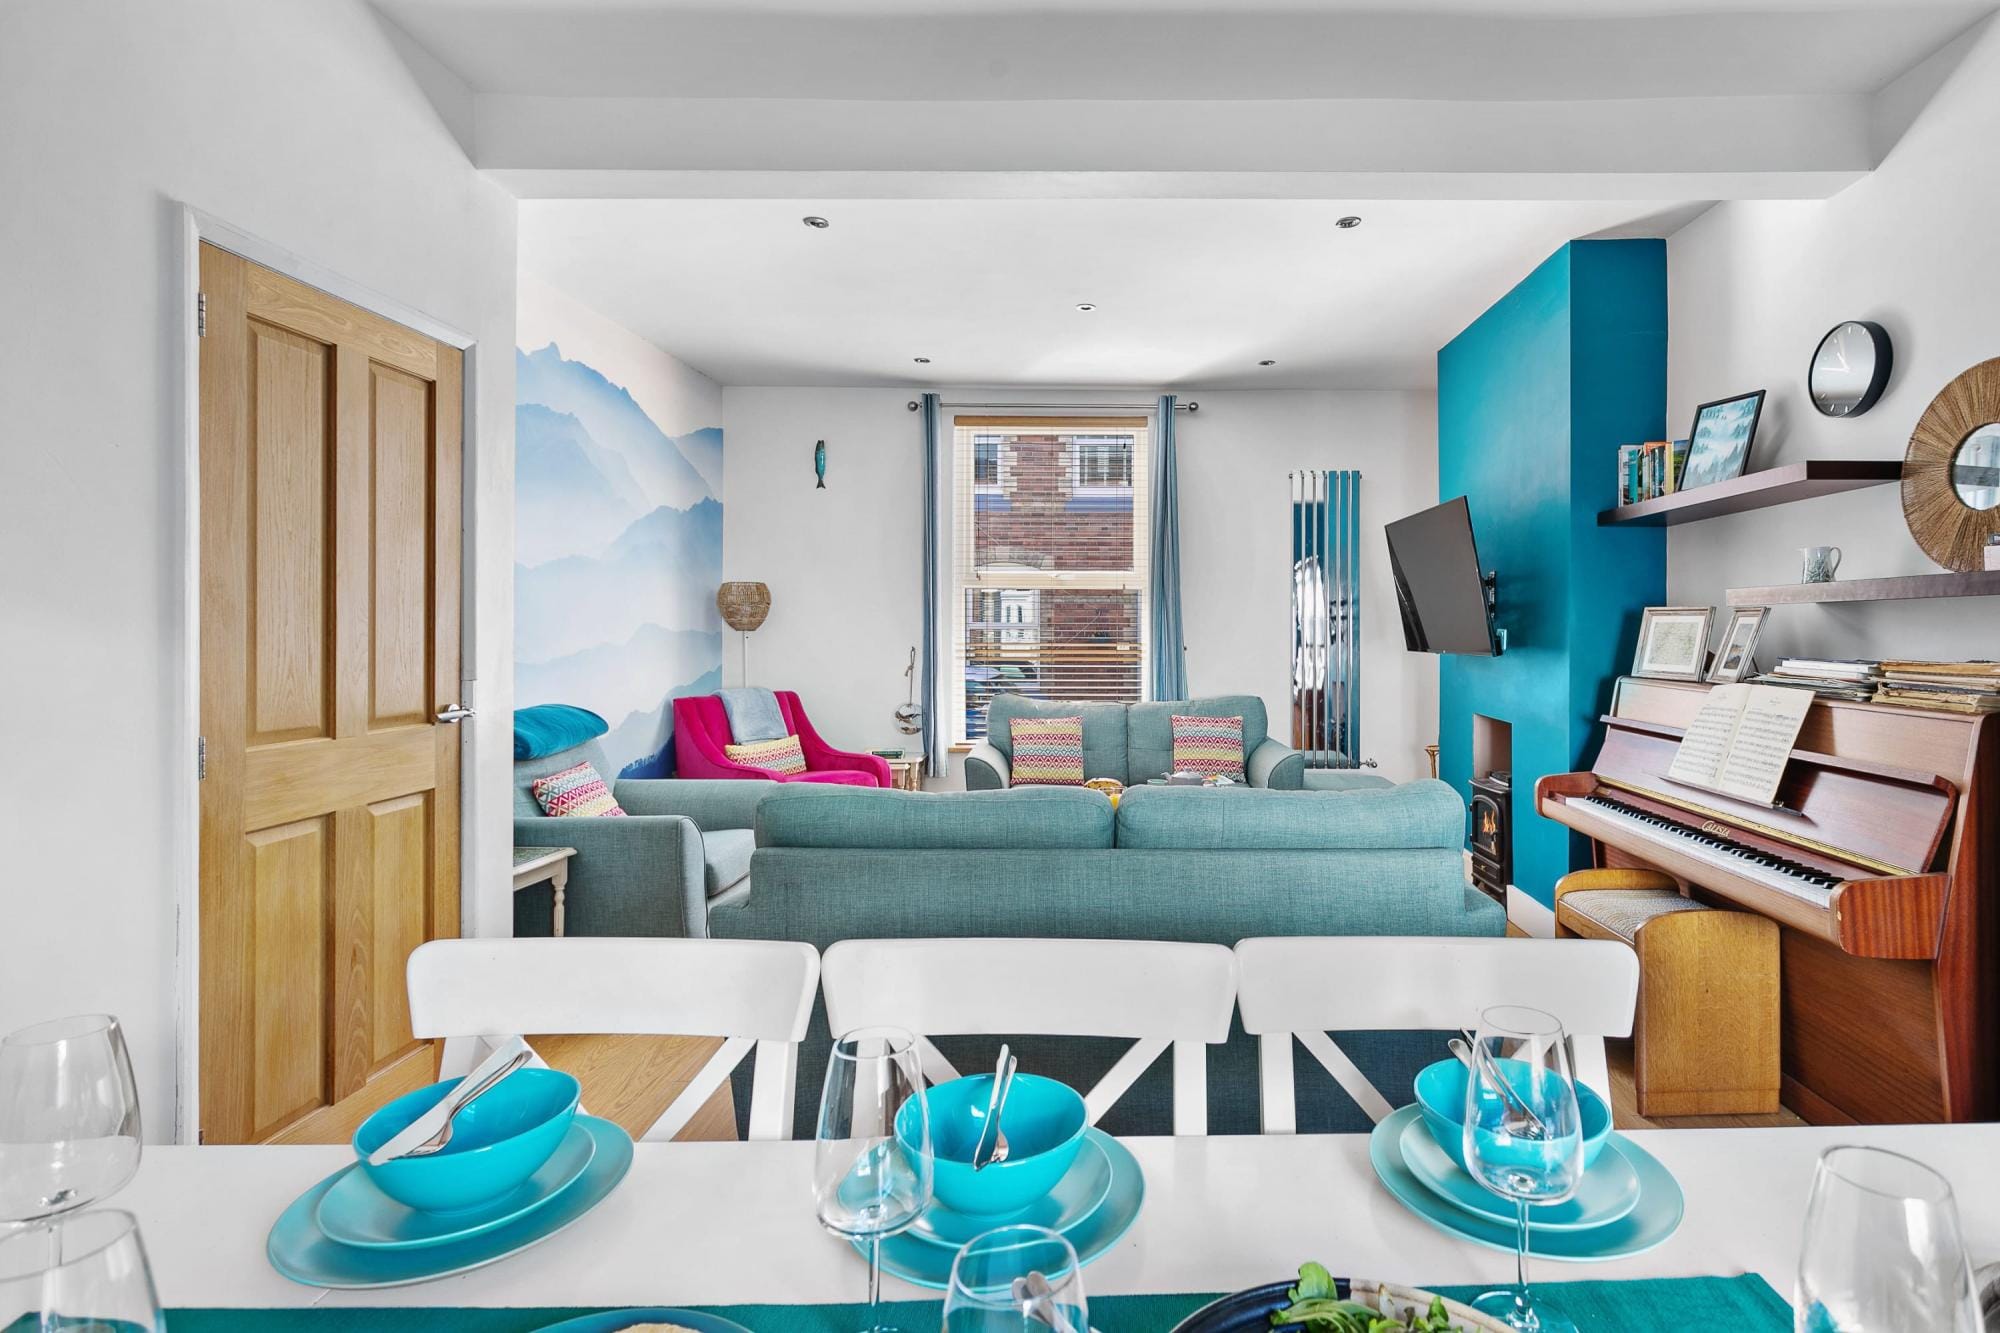 Property Image 2 - The Terrace - Light  bright  characterful near beaches